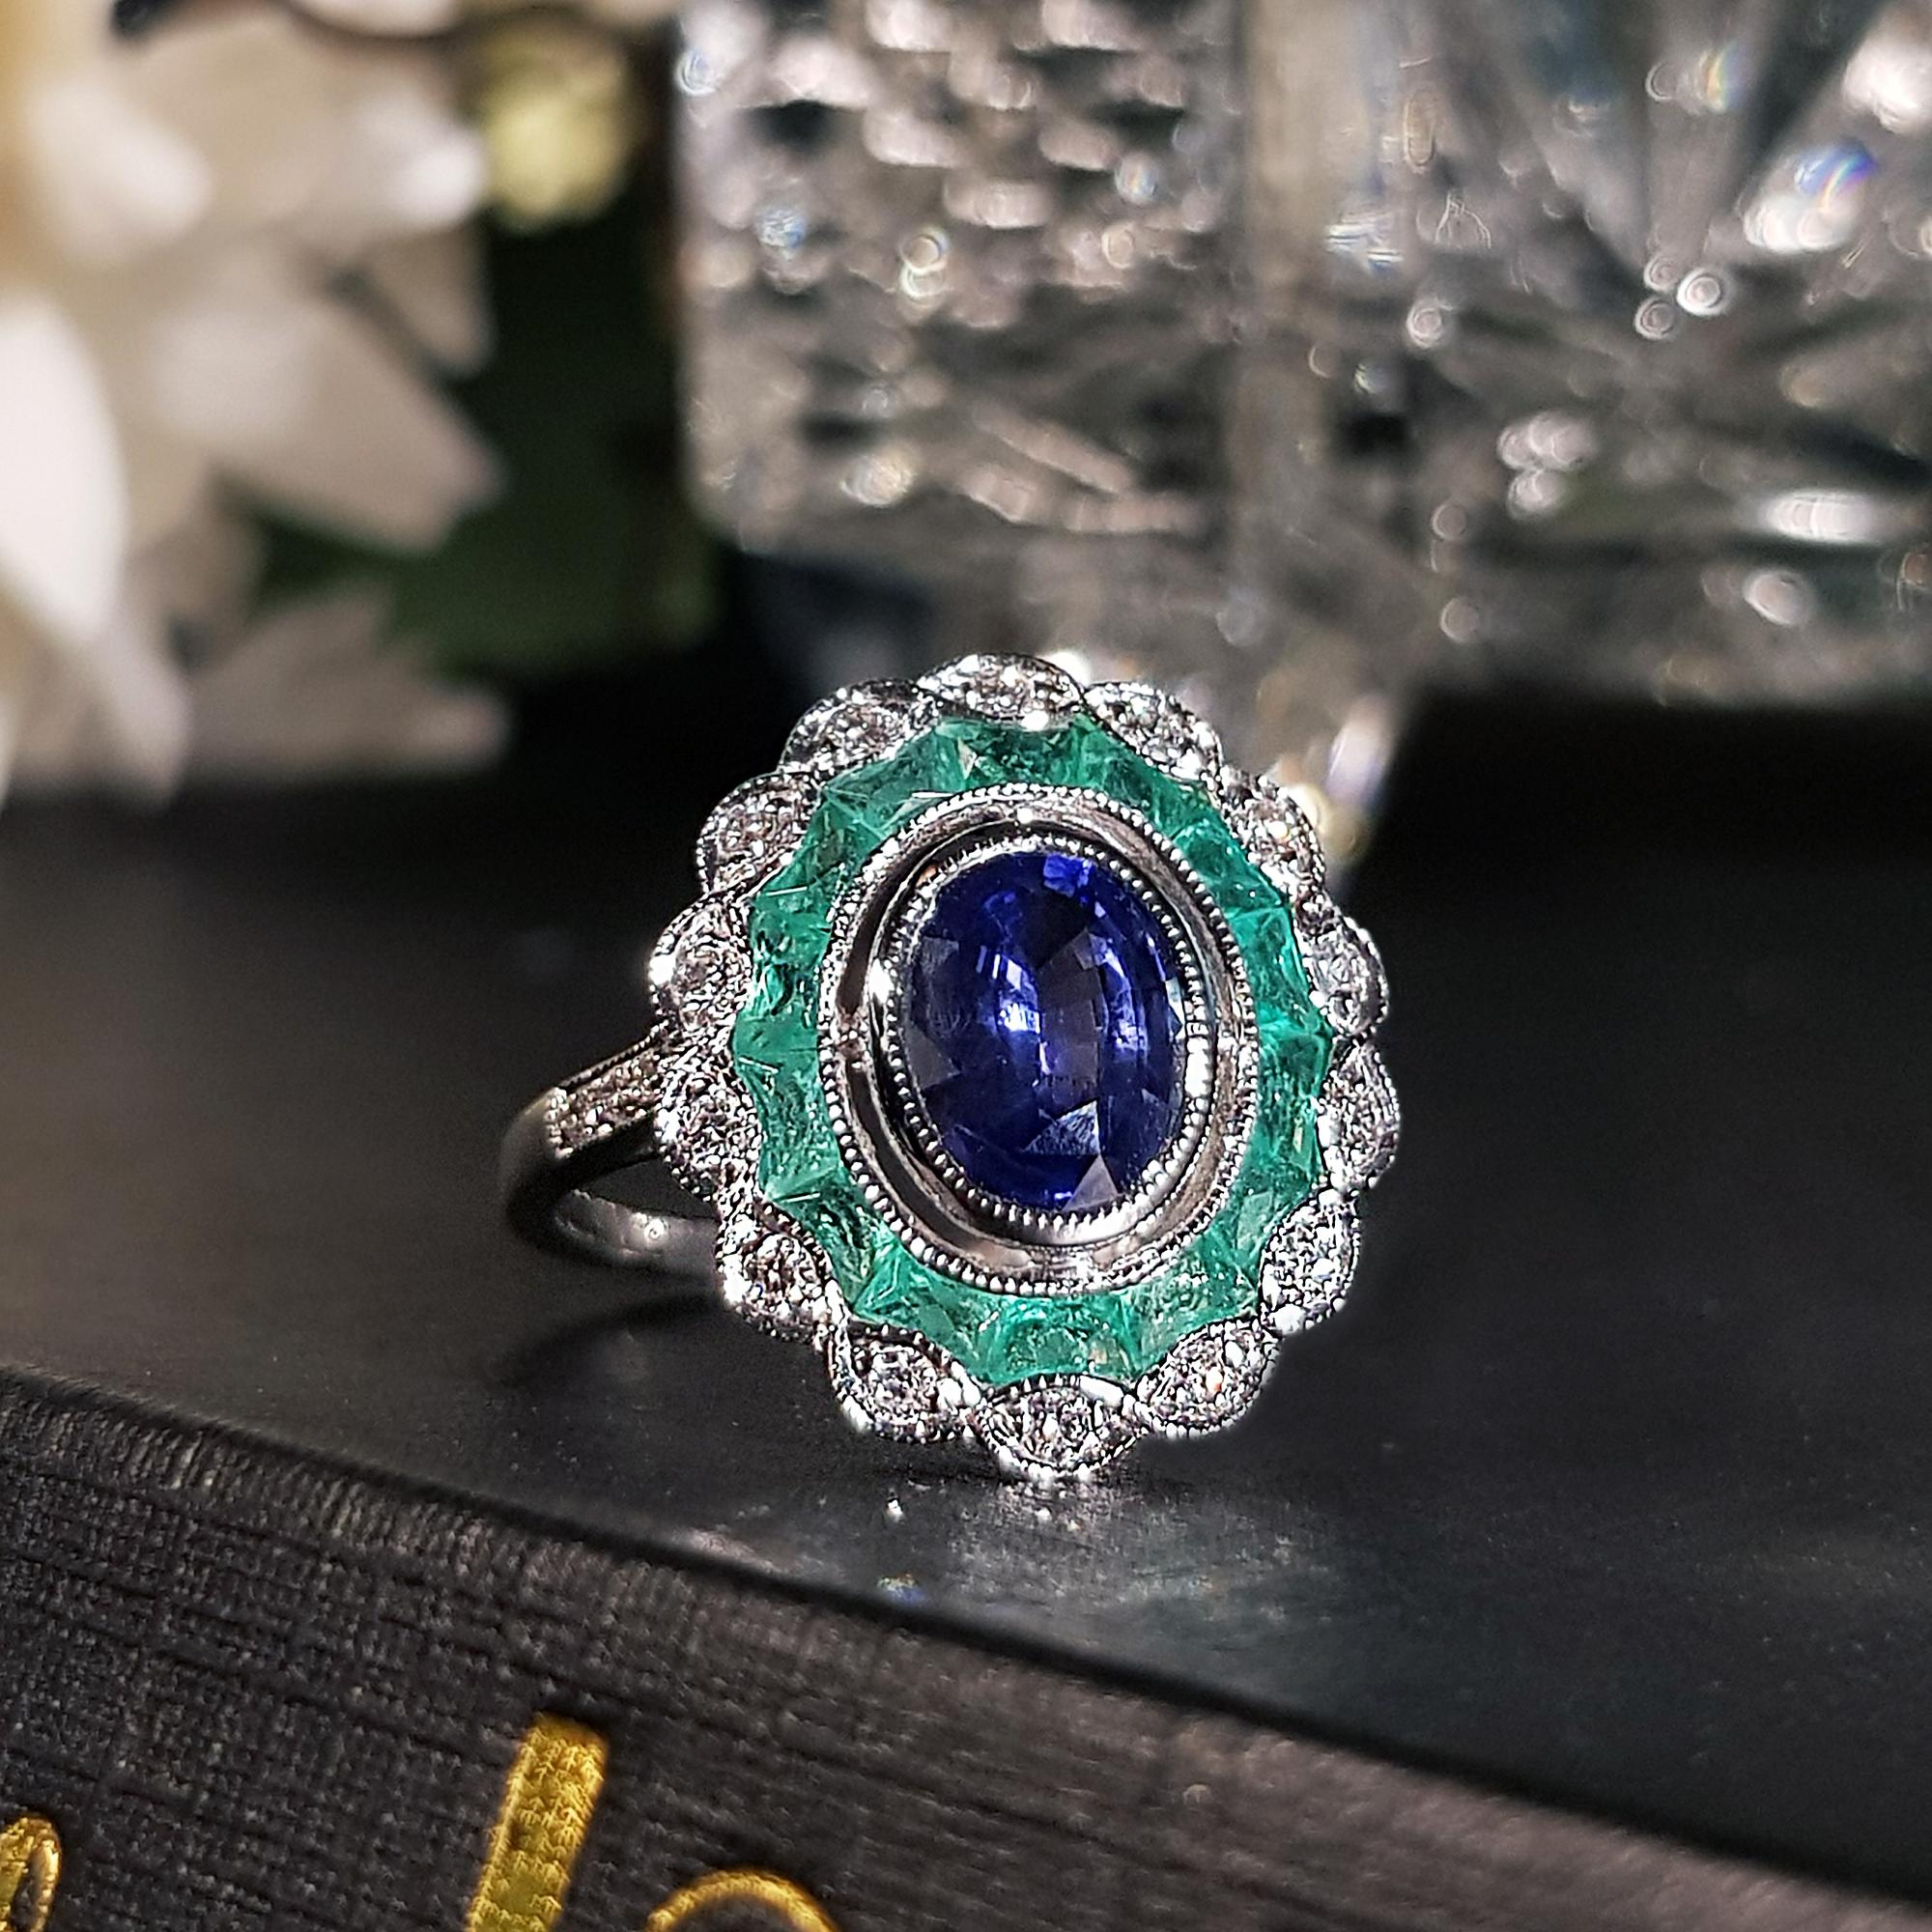 Centering an oval cut Ceylon Sapphire, accented by French cut Emeralds, enhanced by round cut diamonds. This Art Deco inspired ring is a perfect piece for an engagement ring, or to commemorate an anniversary.

Ring Information
Style: Art-deco
Metal: